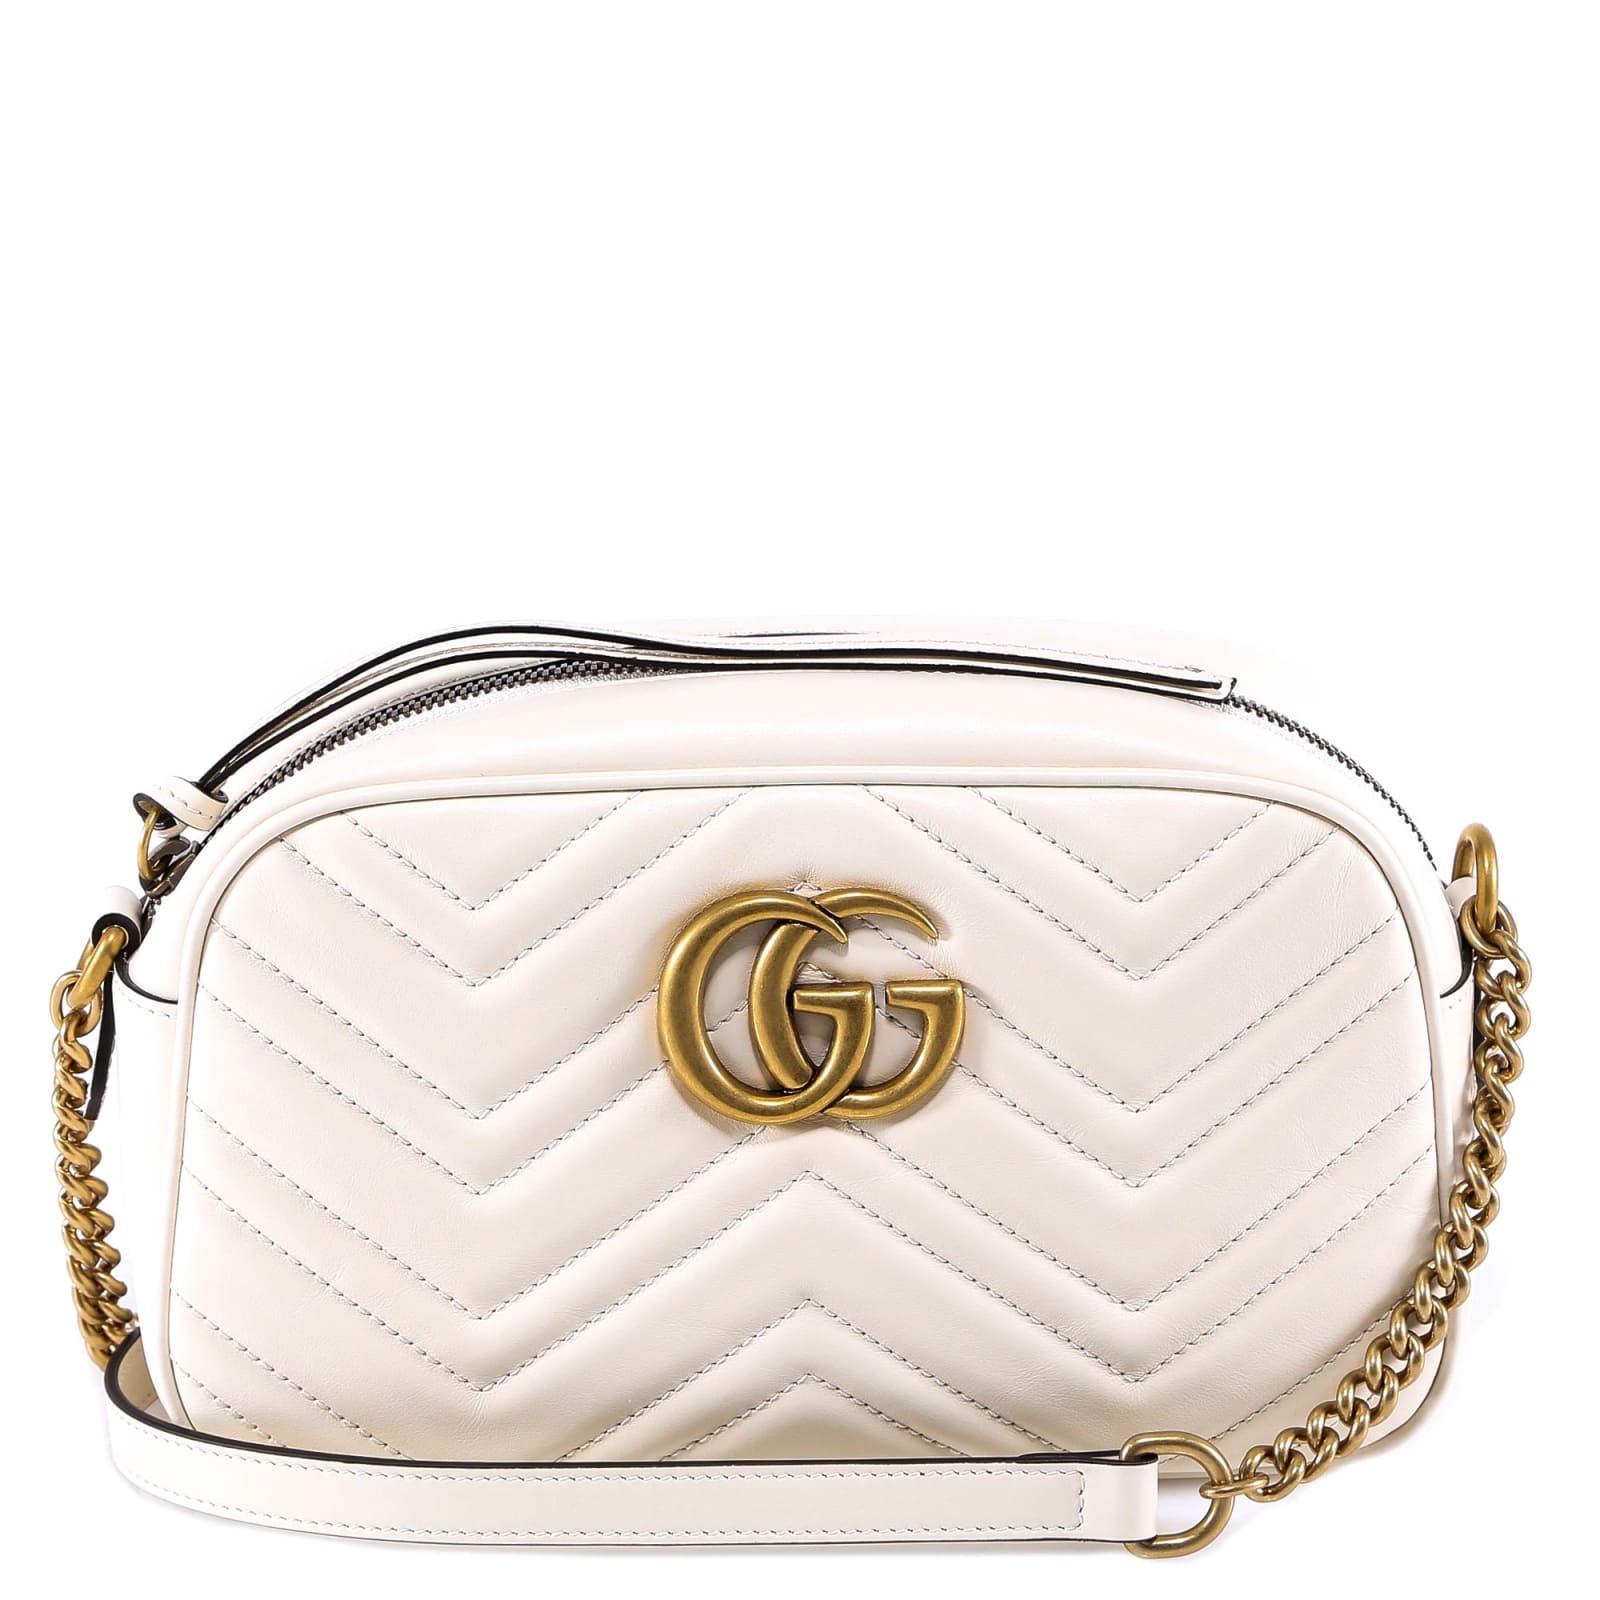 Gucci Gg Marmont Shoulder Bag In White